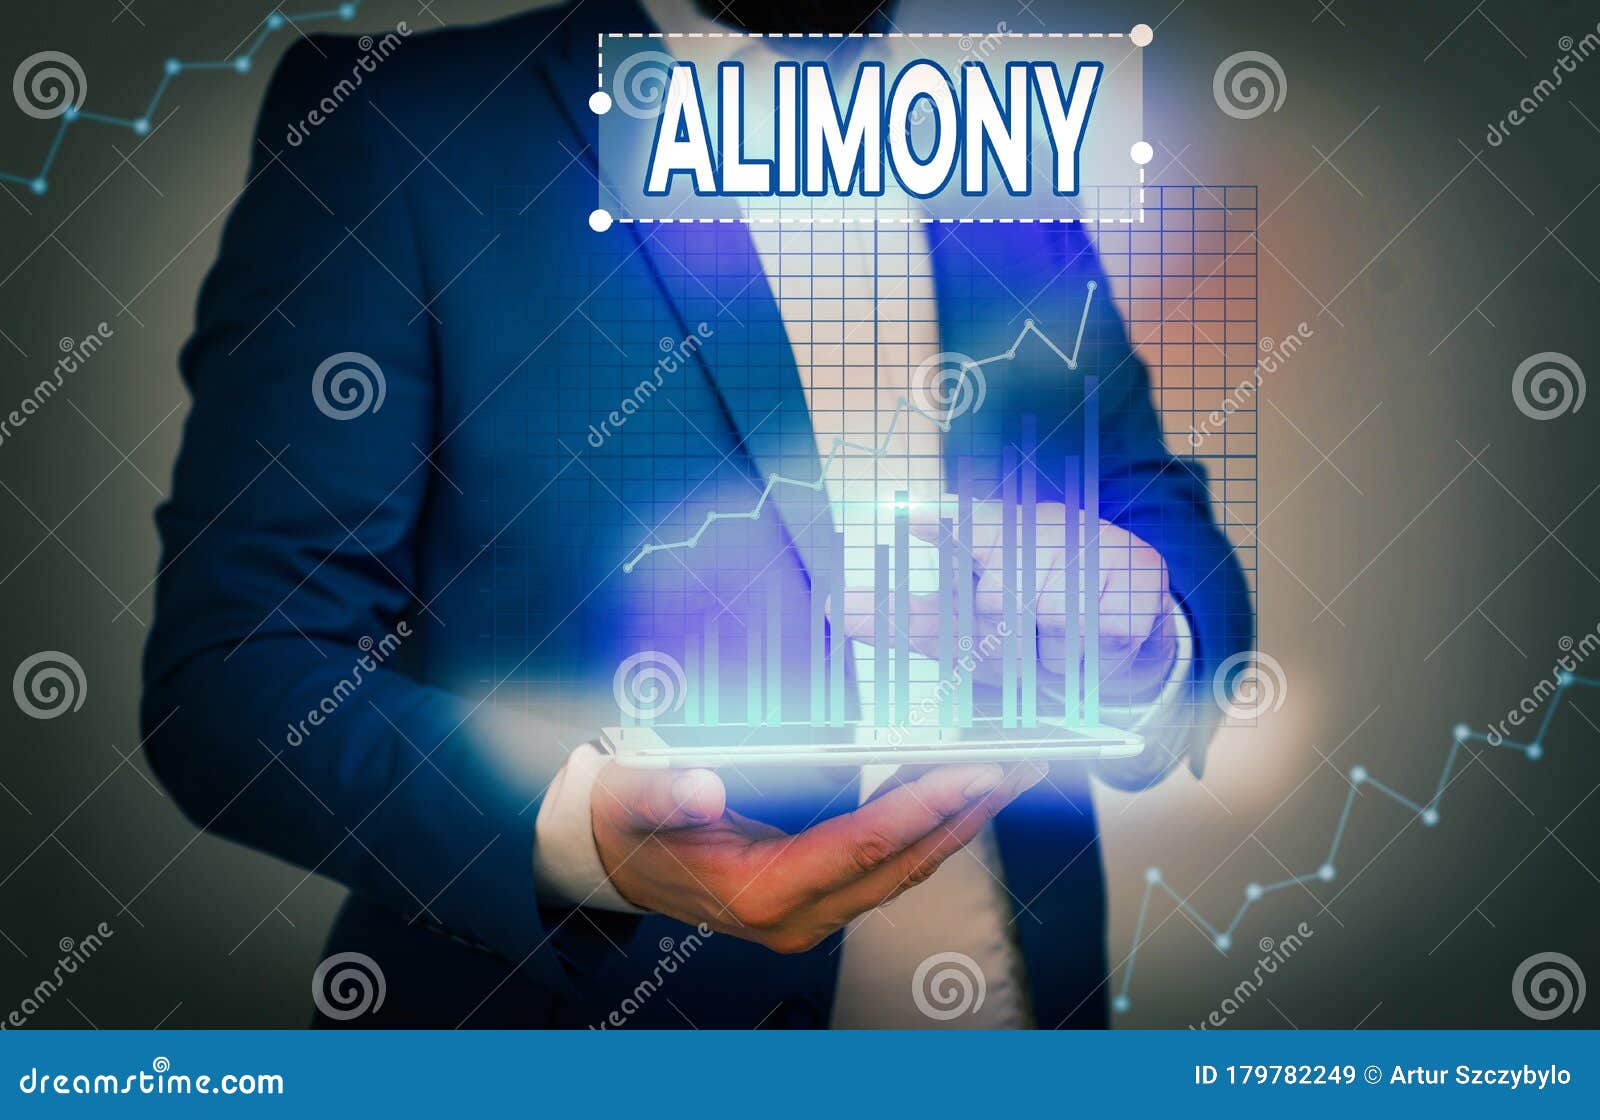 Alimony meaning